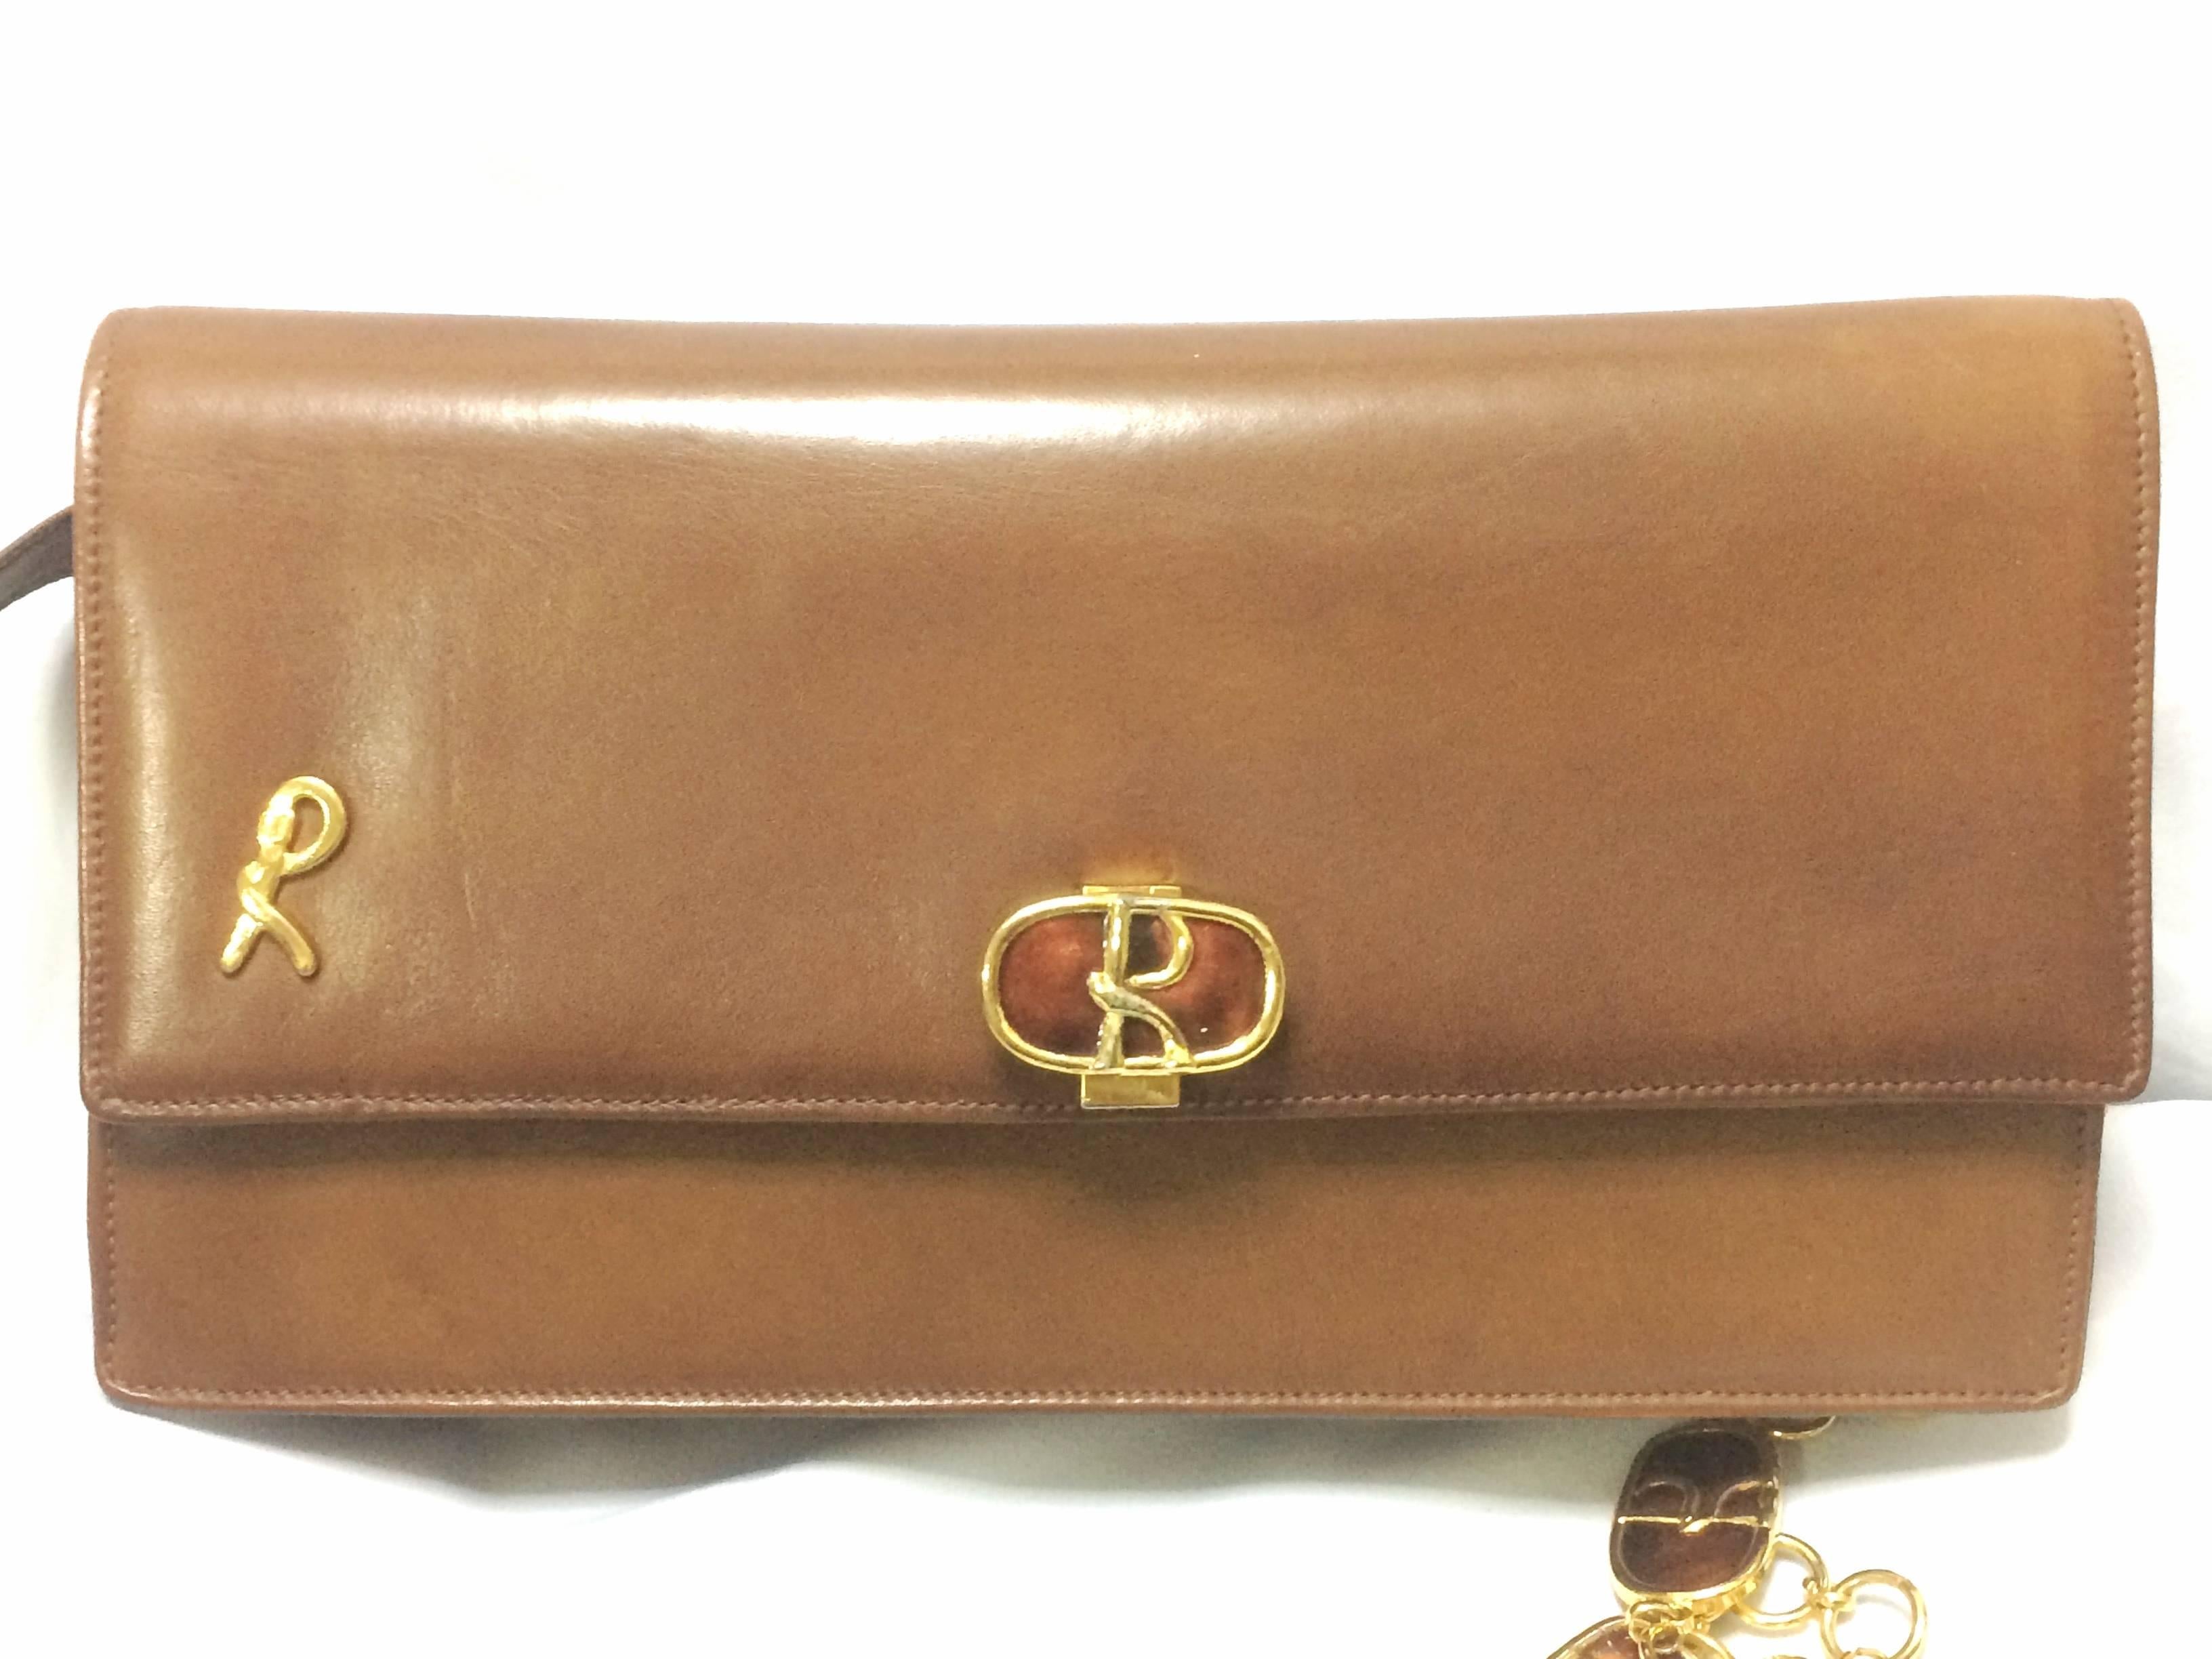 1970's vintage Roberta di Camerino brown genuine leather purse with R cham chains. A rare masterpiece.

70's vintage Roberta di Camerino brown leather purse.
This is a very rare 70s Roberta di Camerino vintage leather purse. 
Featuring 2 